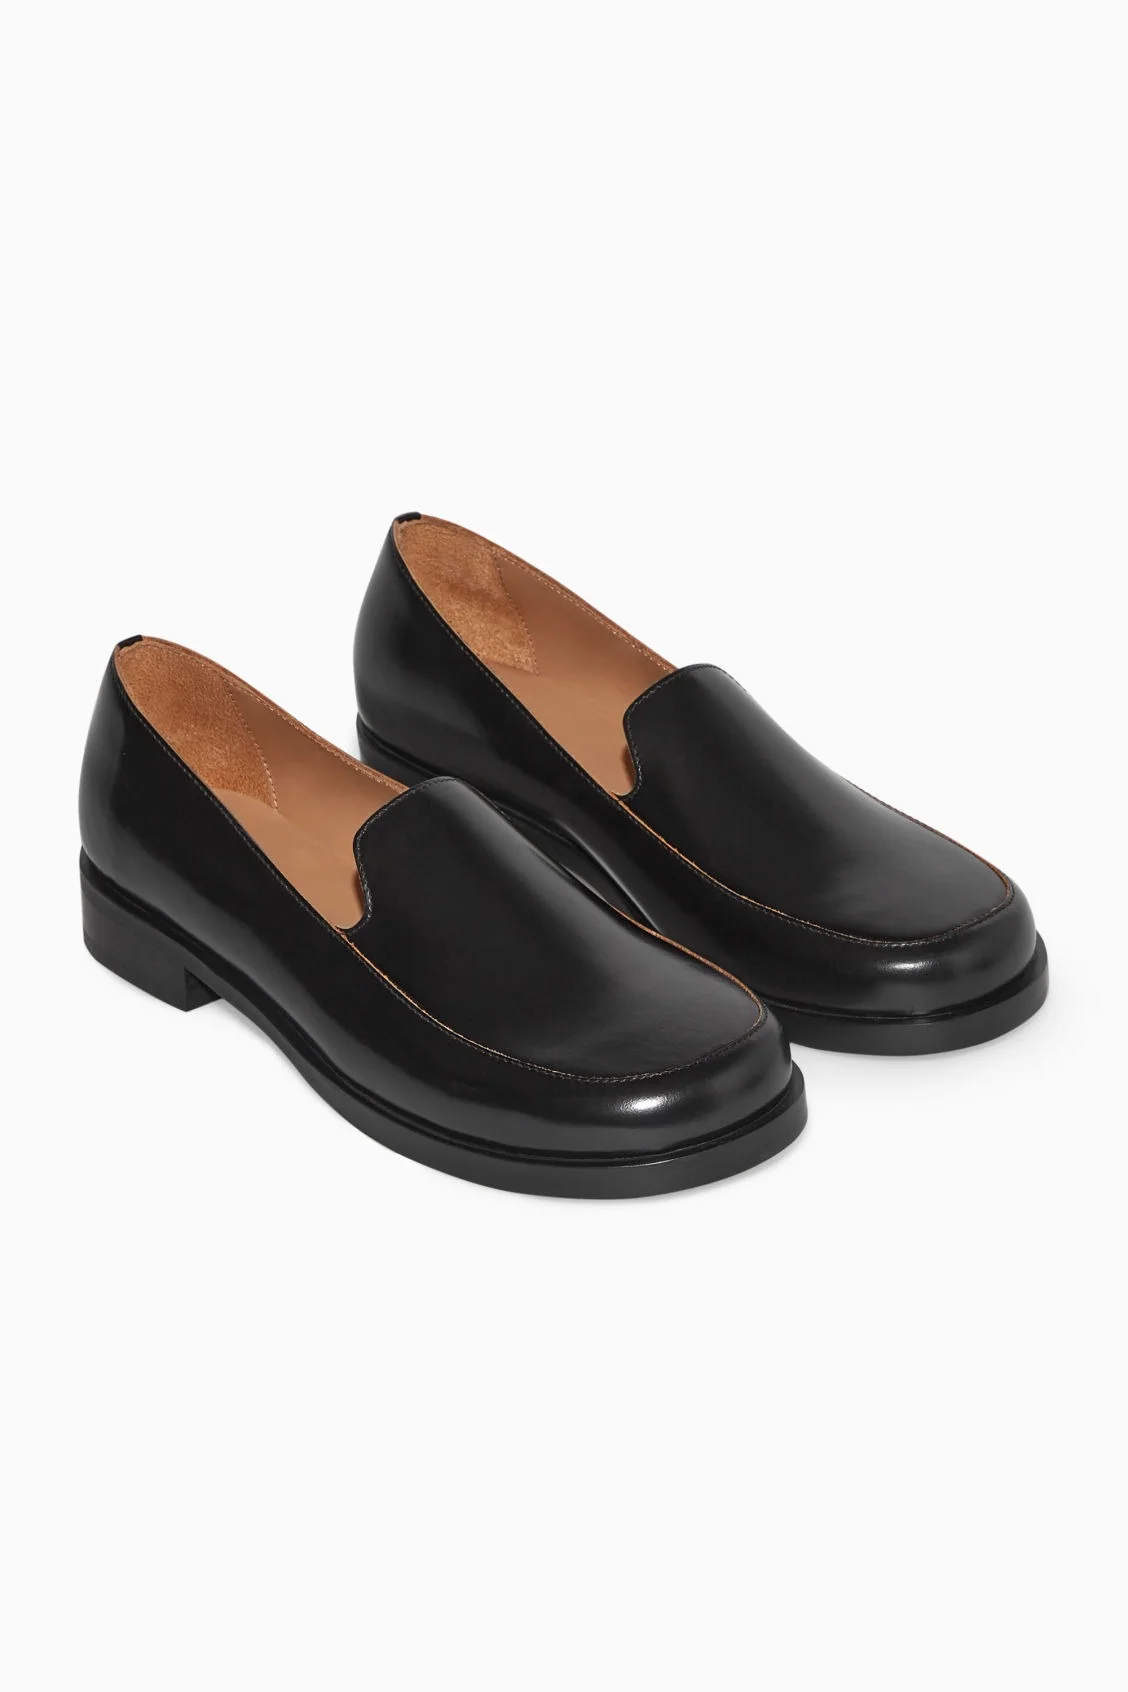 COS◇シューズ/37/BLK/レザー/LEATHER MOCCASIN LOAFERS-